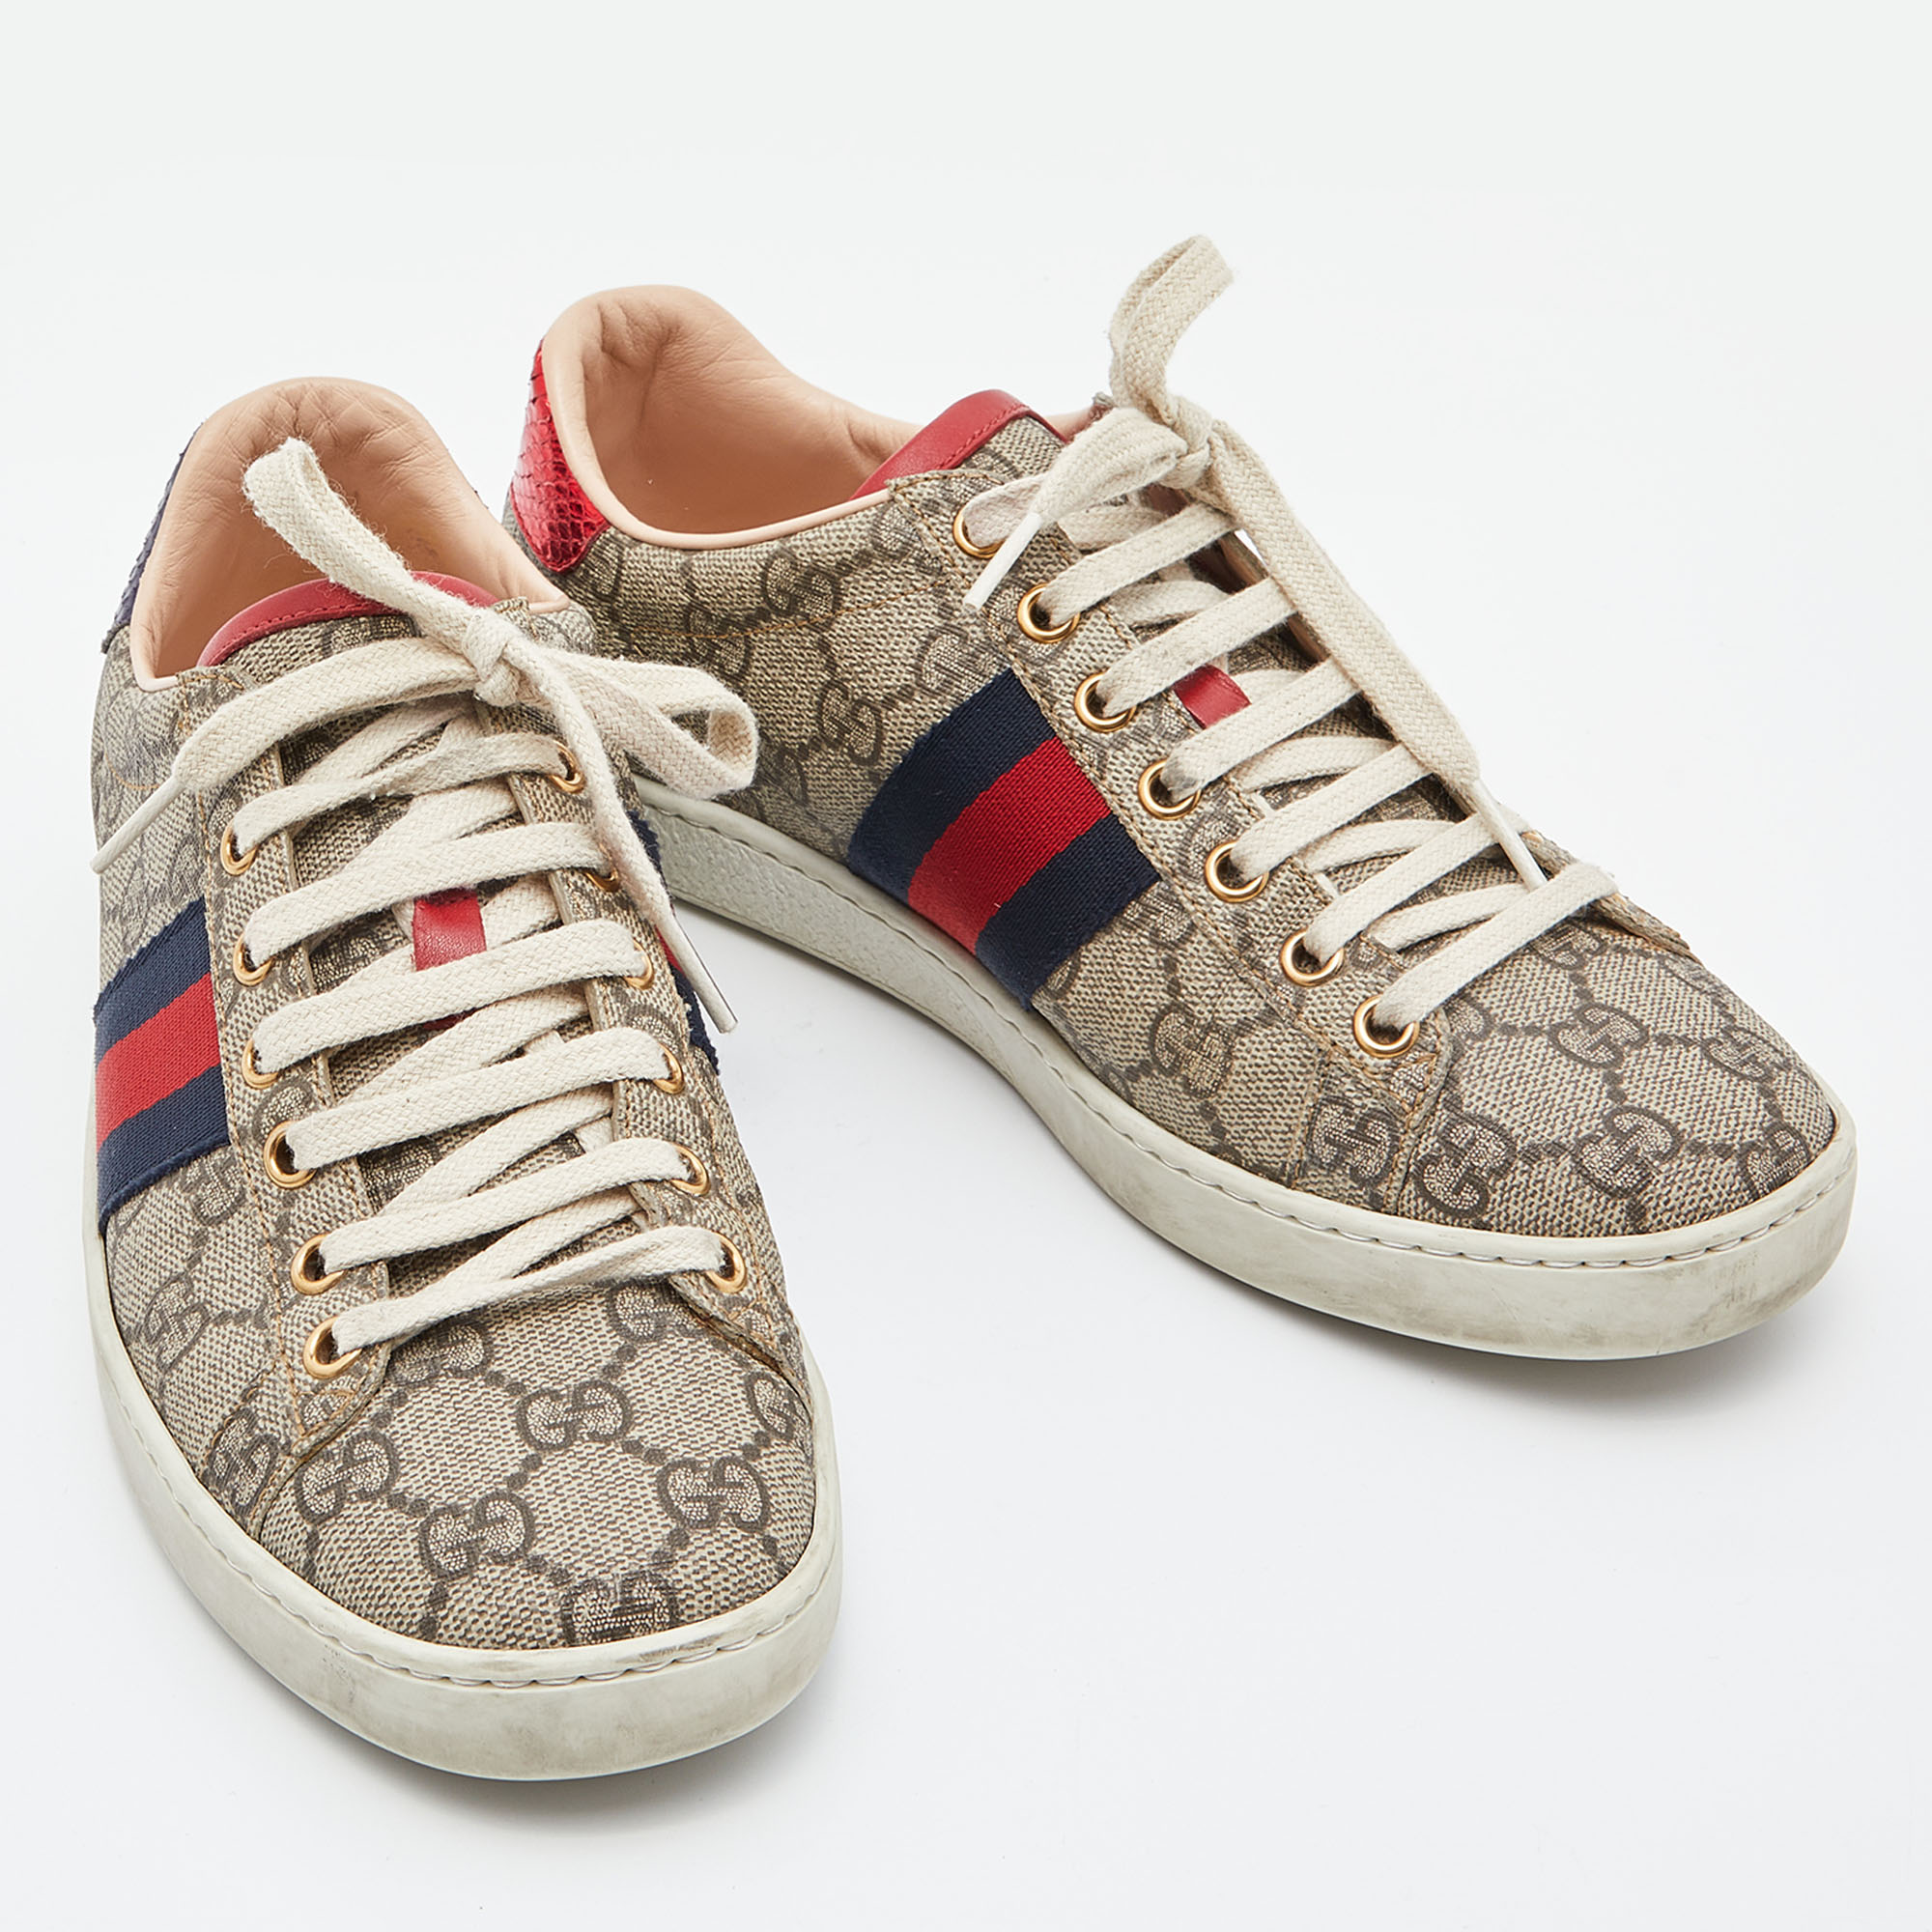 Gucci Beige/Brown GG Supreme Canvas Ace Sneakers Size 37